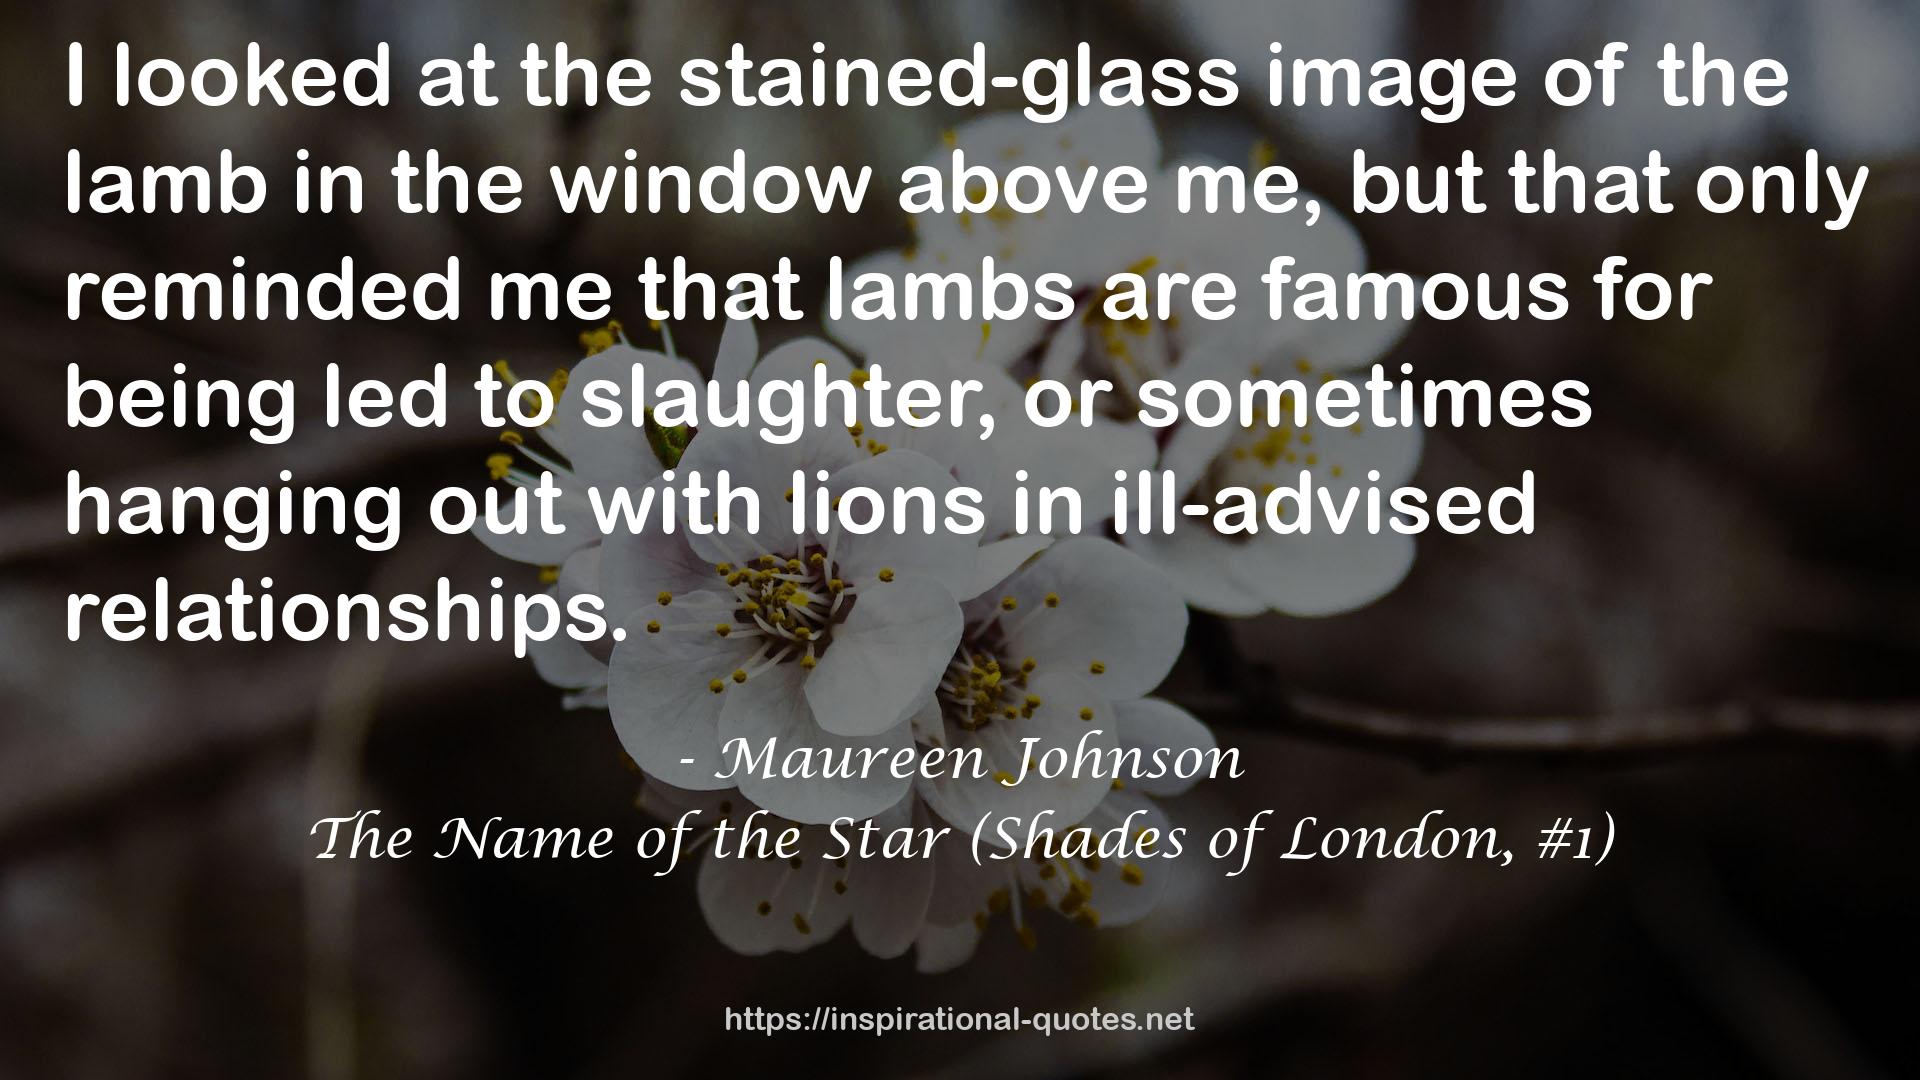 The Name of the Star (Shades of London, #1) QUOTES